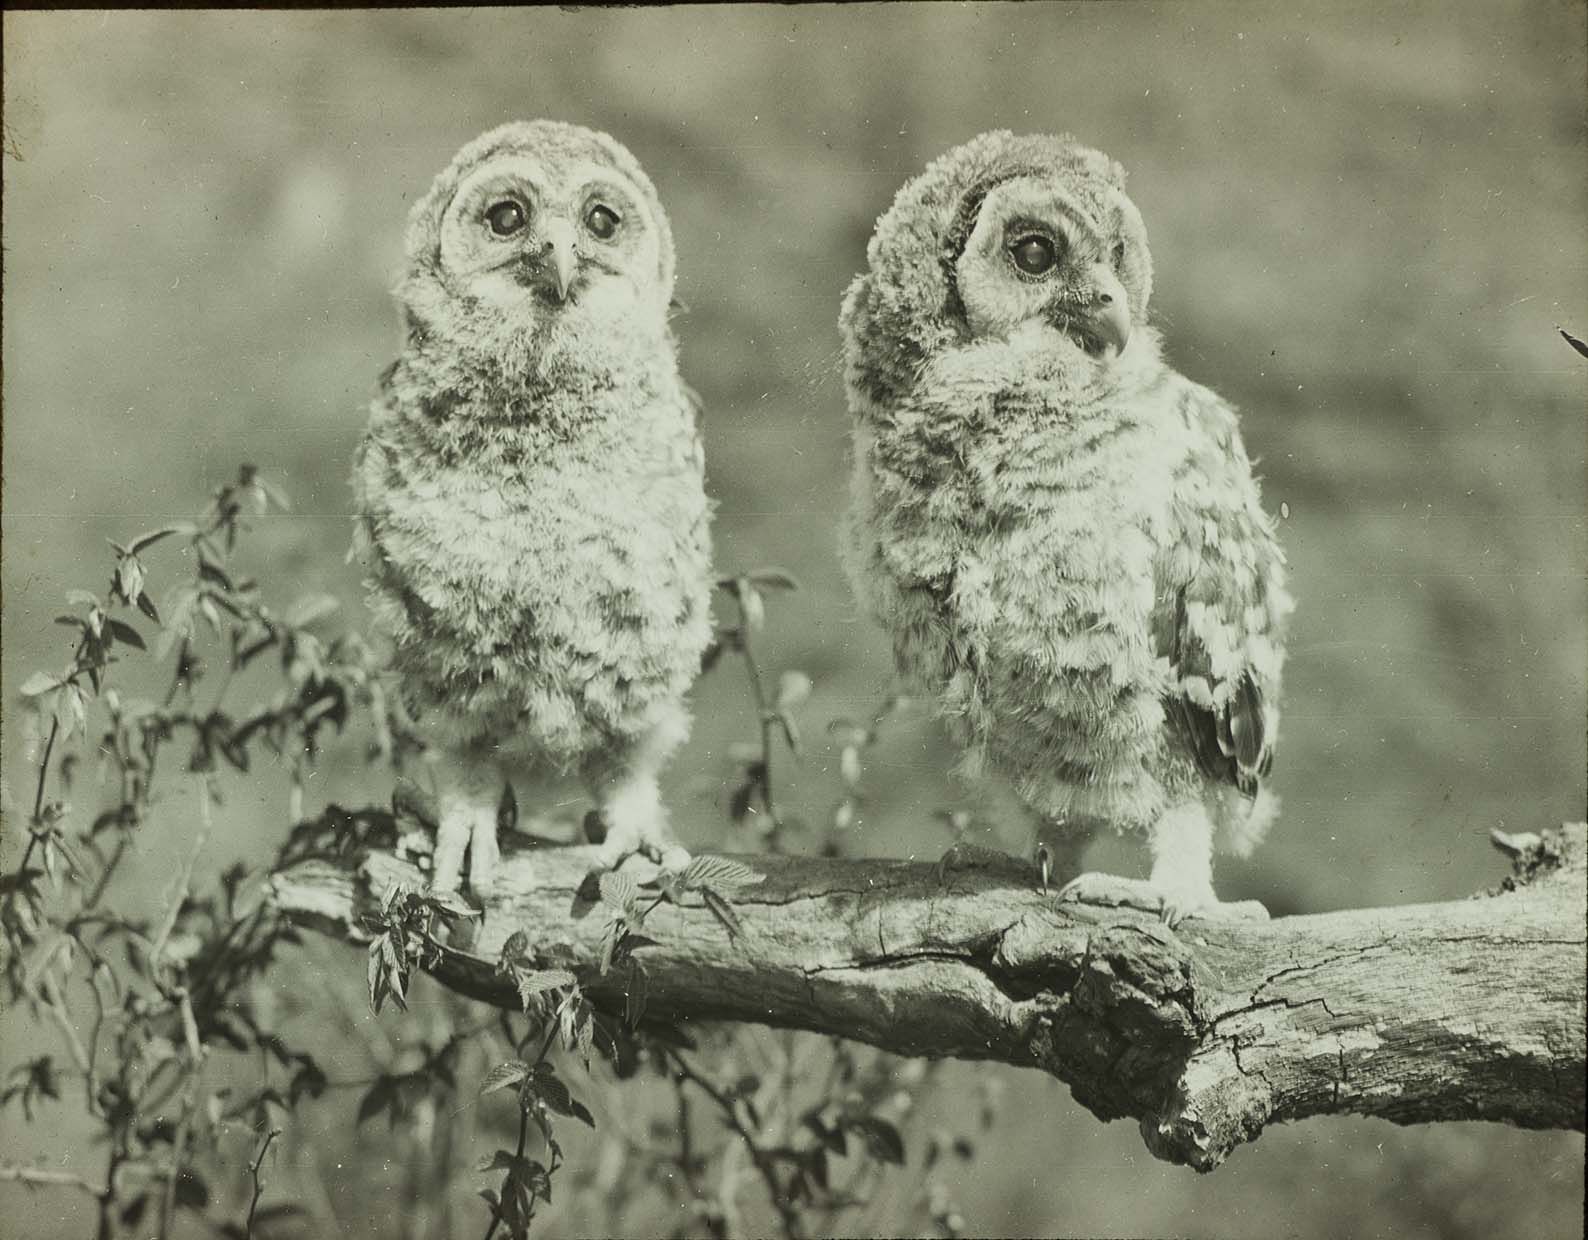 Lantern slide and photograph of two young Barred Owls perching on a tree branch